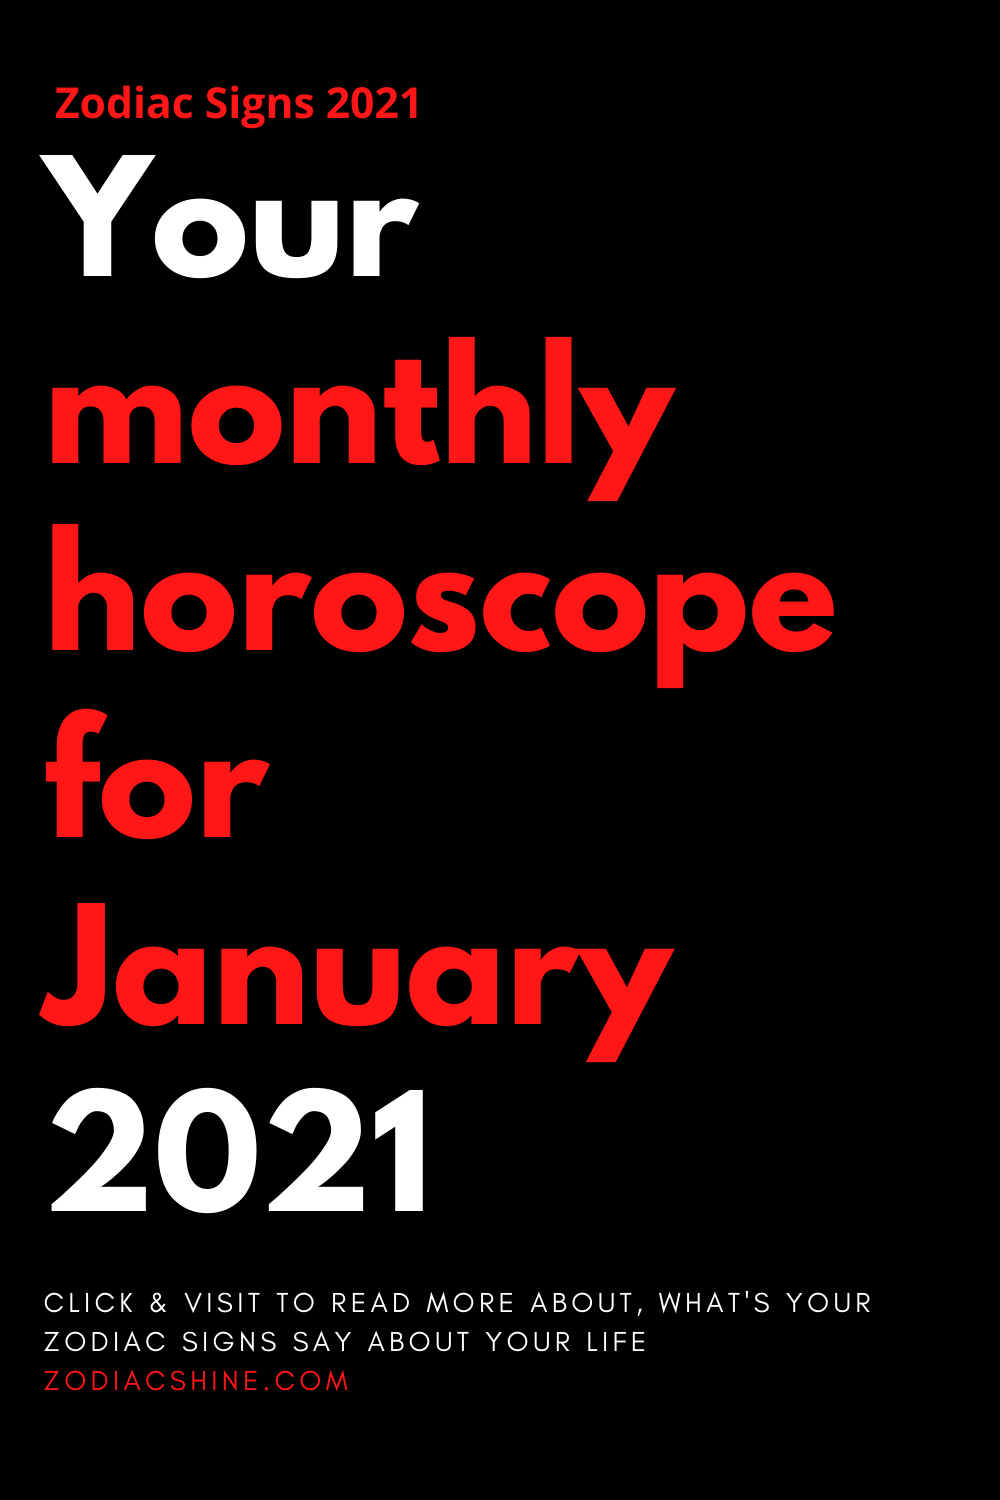 Your monthly horoscope for January 2021